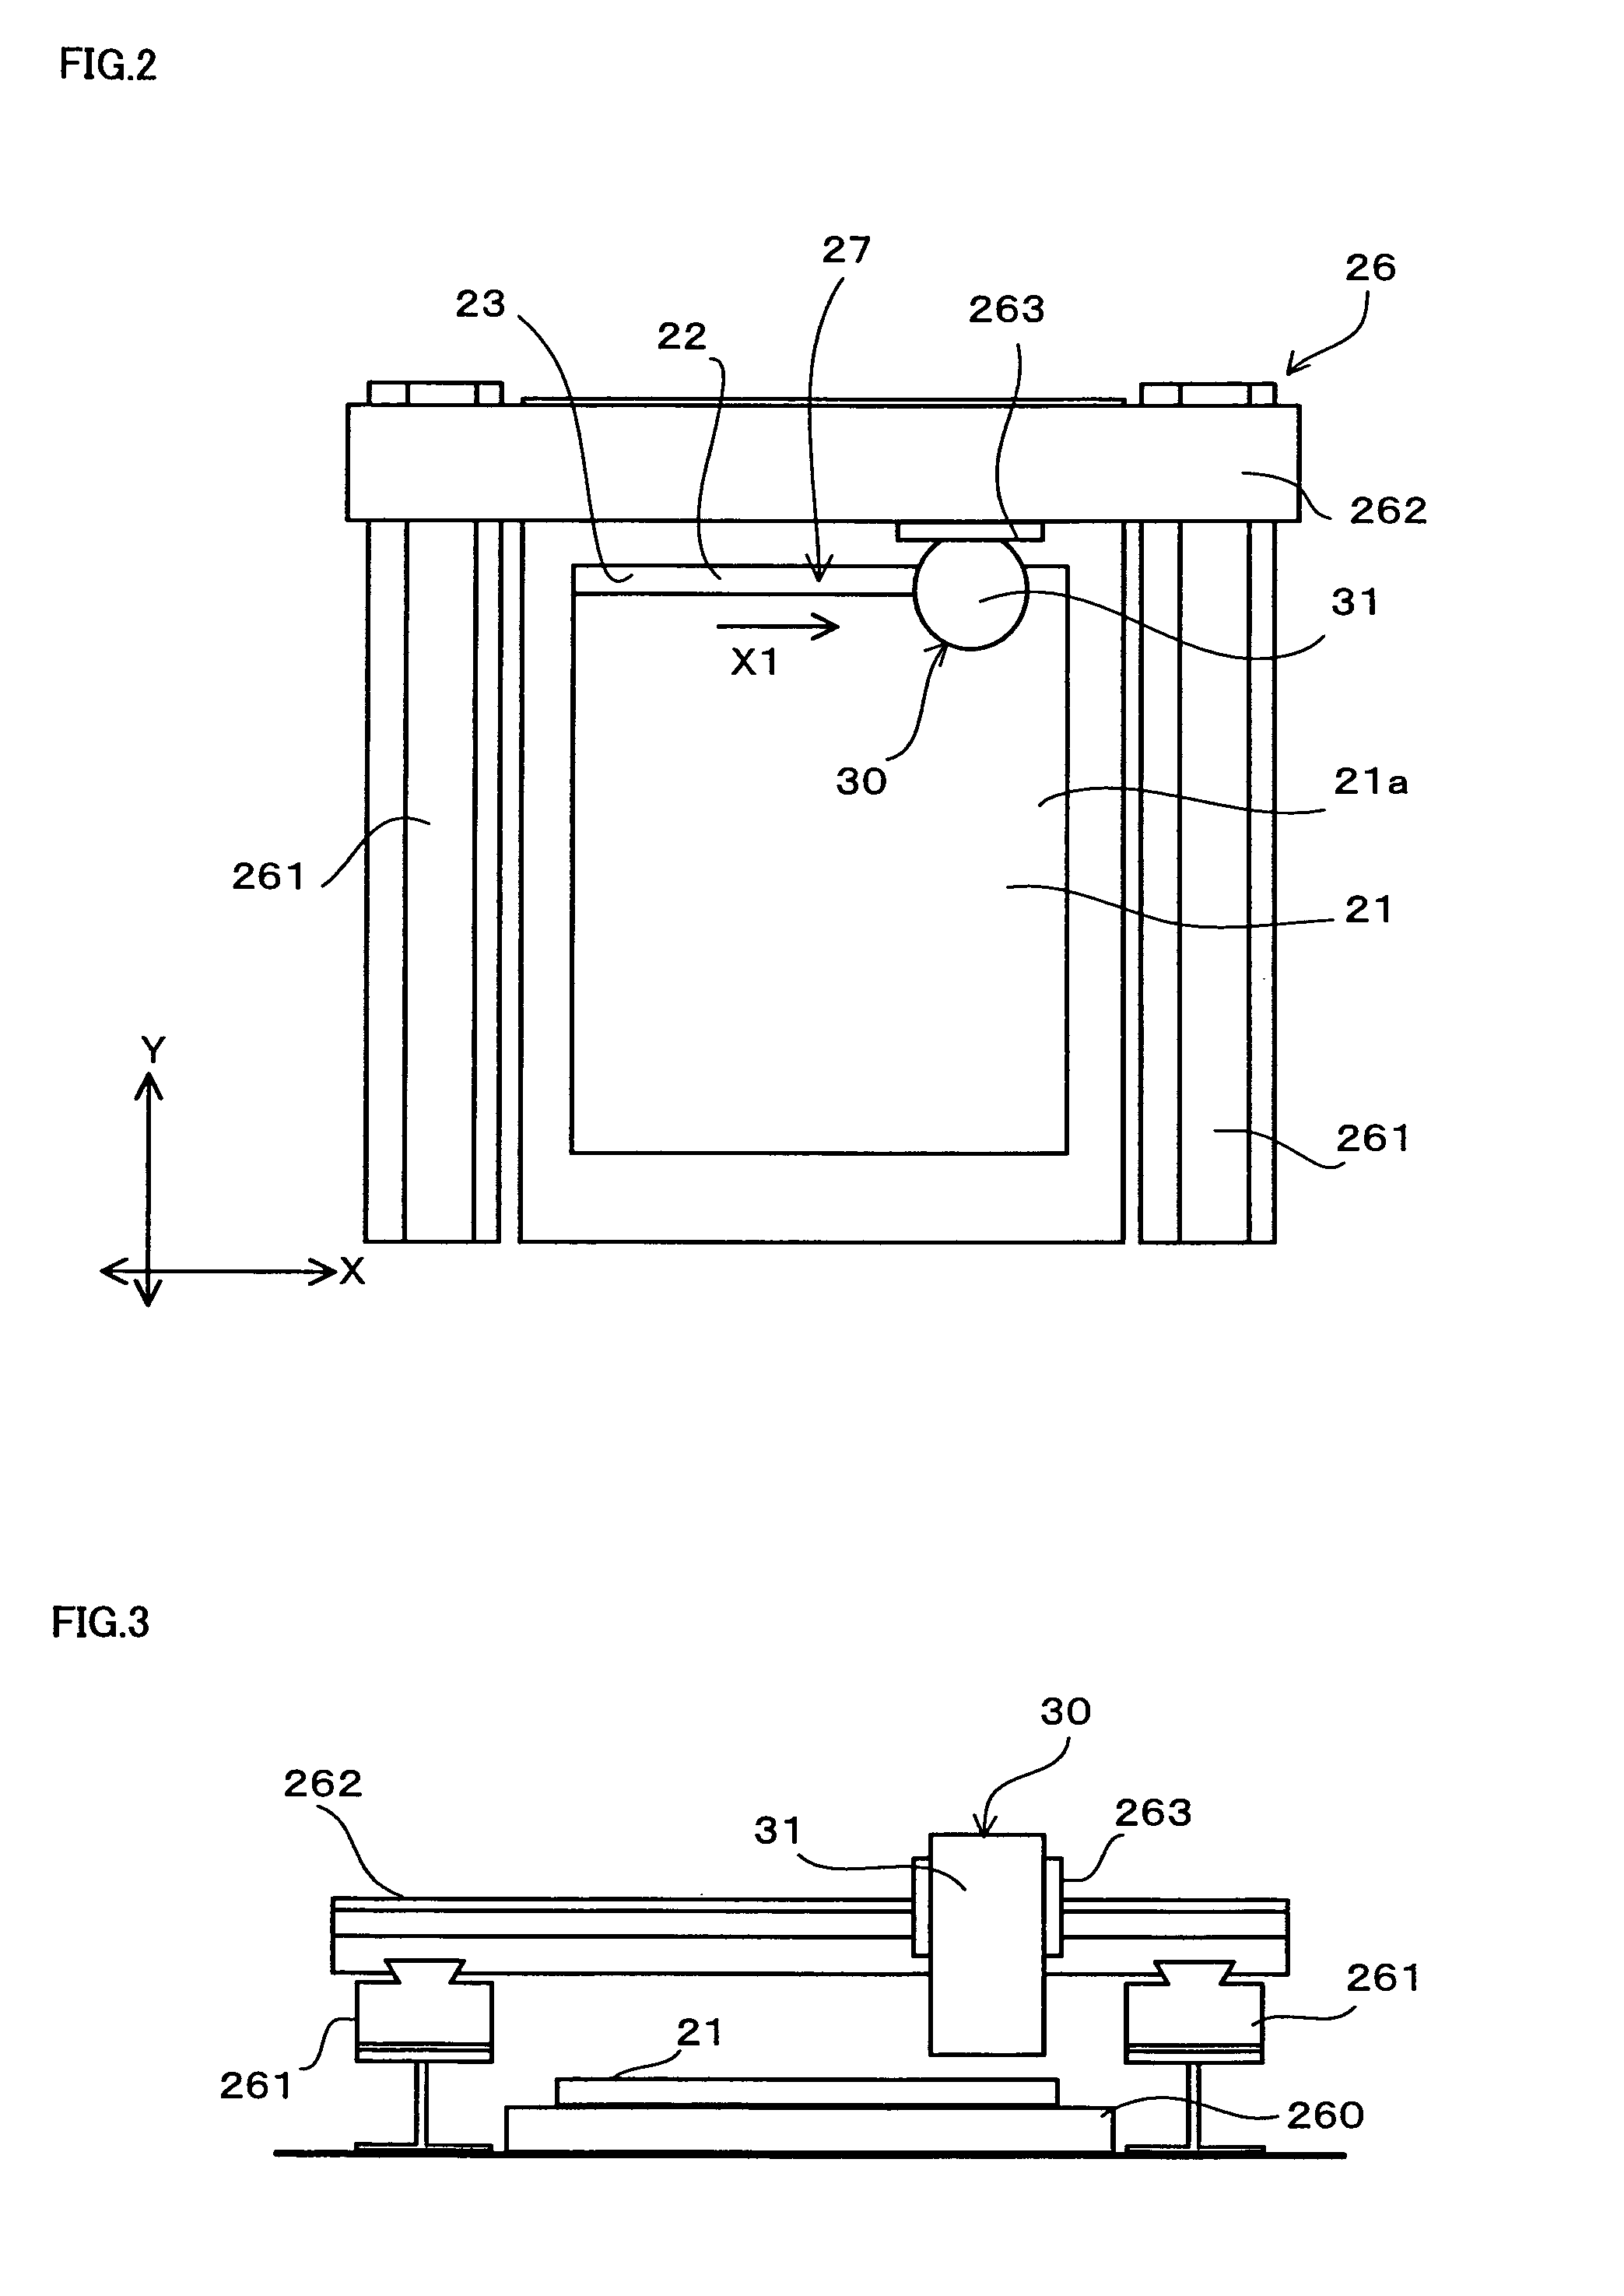 Method of and apparatus for molding glazing gasket onto multiplayer glass panel